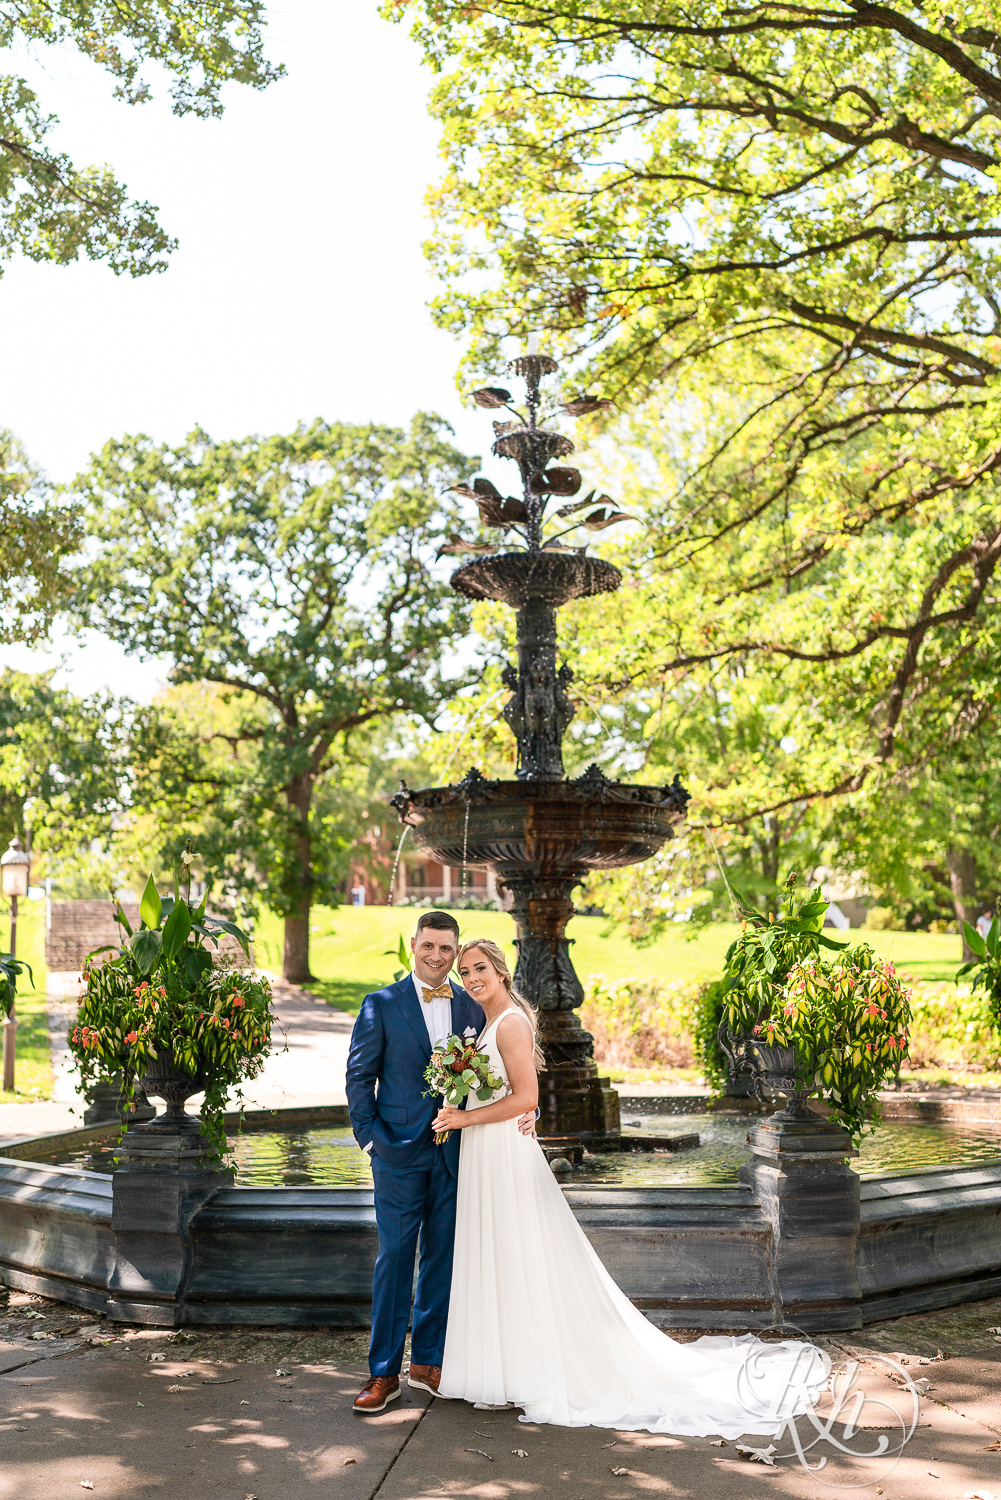 Bride and groom smile and laugh together at Irvine Park in Saint Paul, Minnesota in front of fountain.